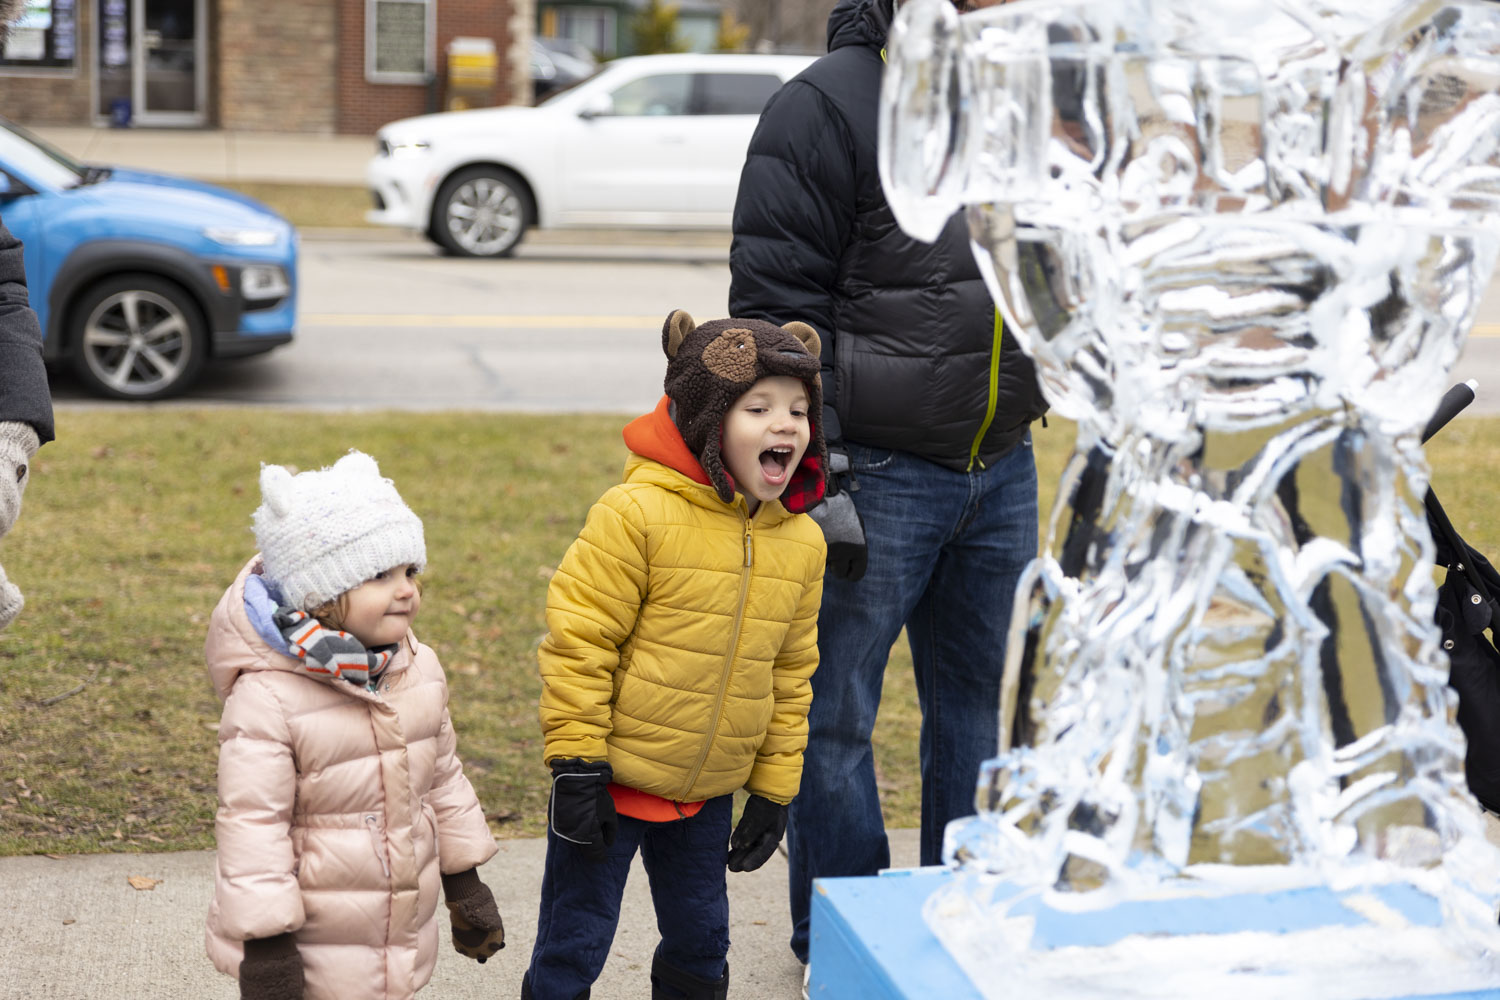 Dexter Ice Festival offers stunning ice sculptures and live